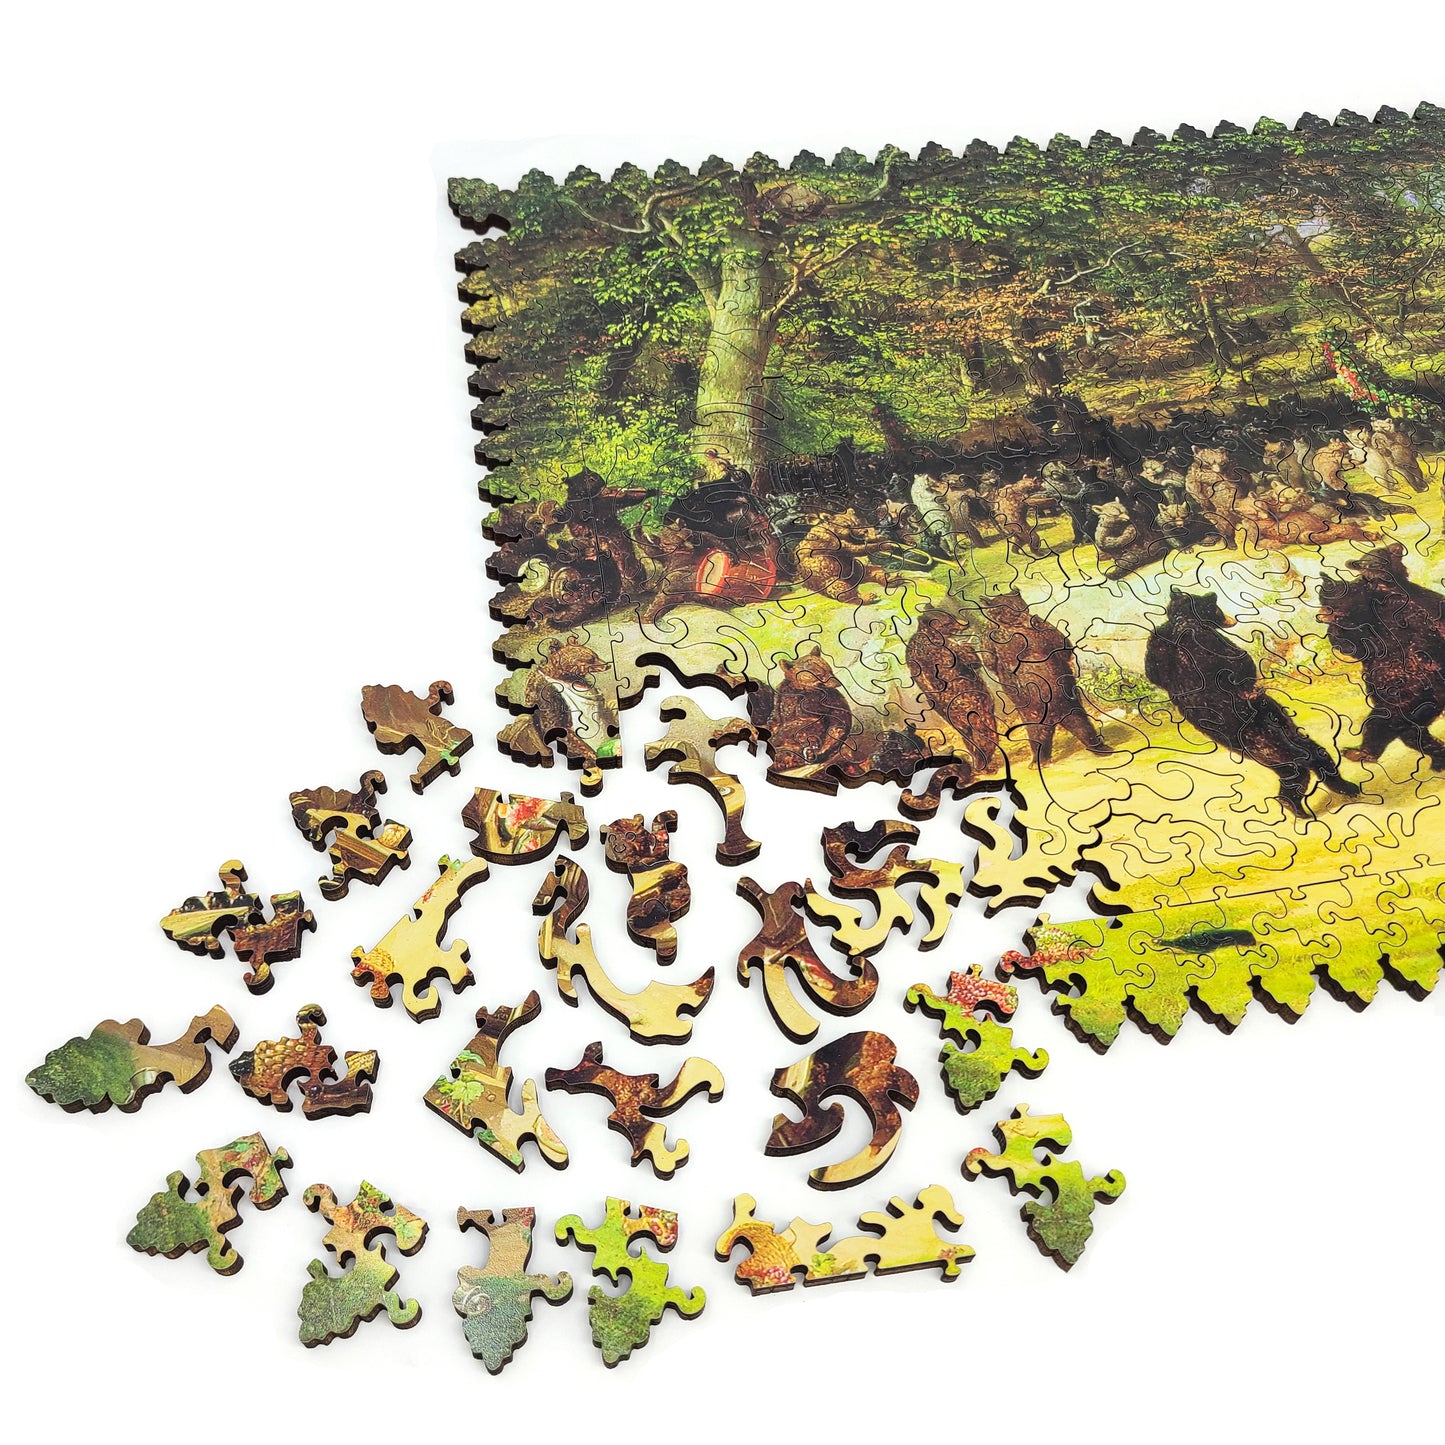 Wooden Jigsaw Puzzle with Uniquely Shaped Pieces for Adults - 373 Pieces - The Bear Dance